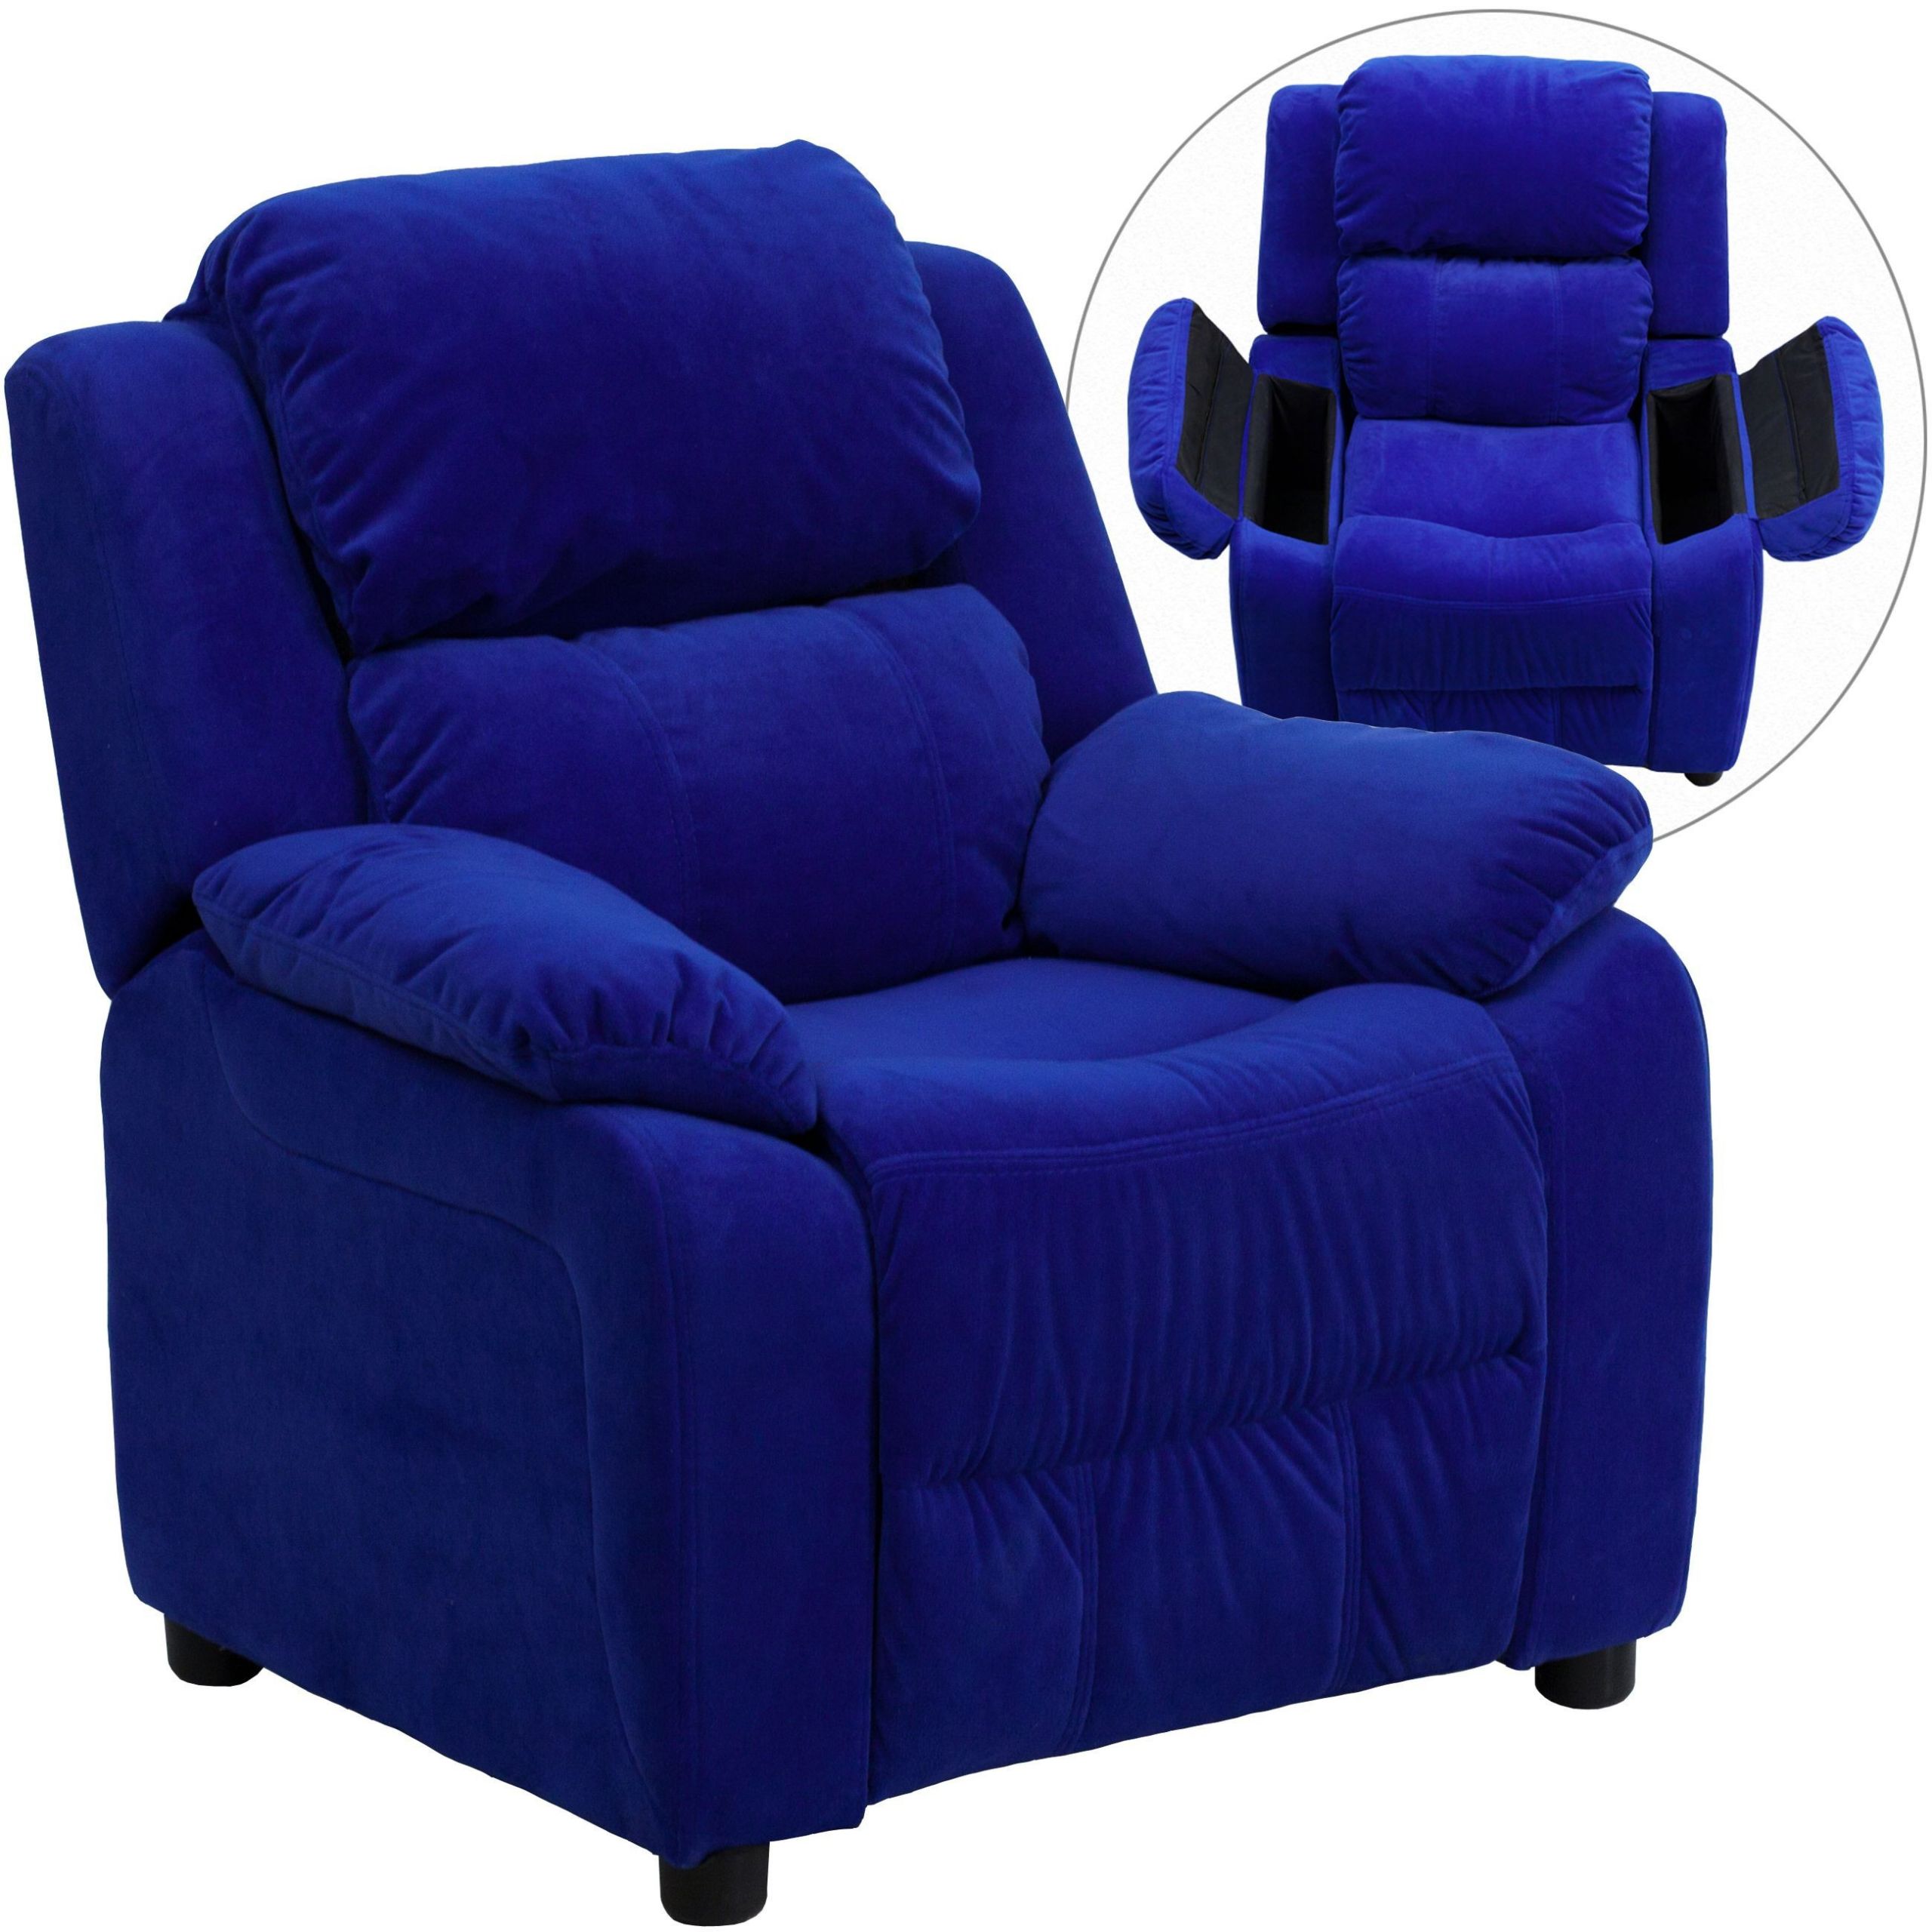 Oversized Kids Chair
 Flash Furniture BT 7985 KID MIC BLUE GG Deluxe Heavily